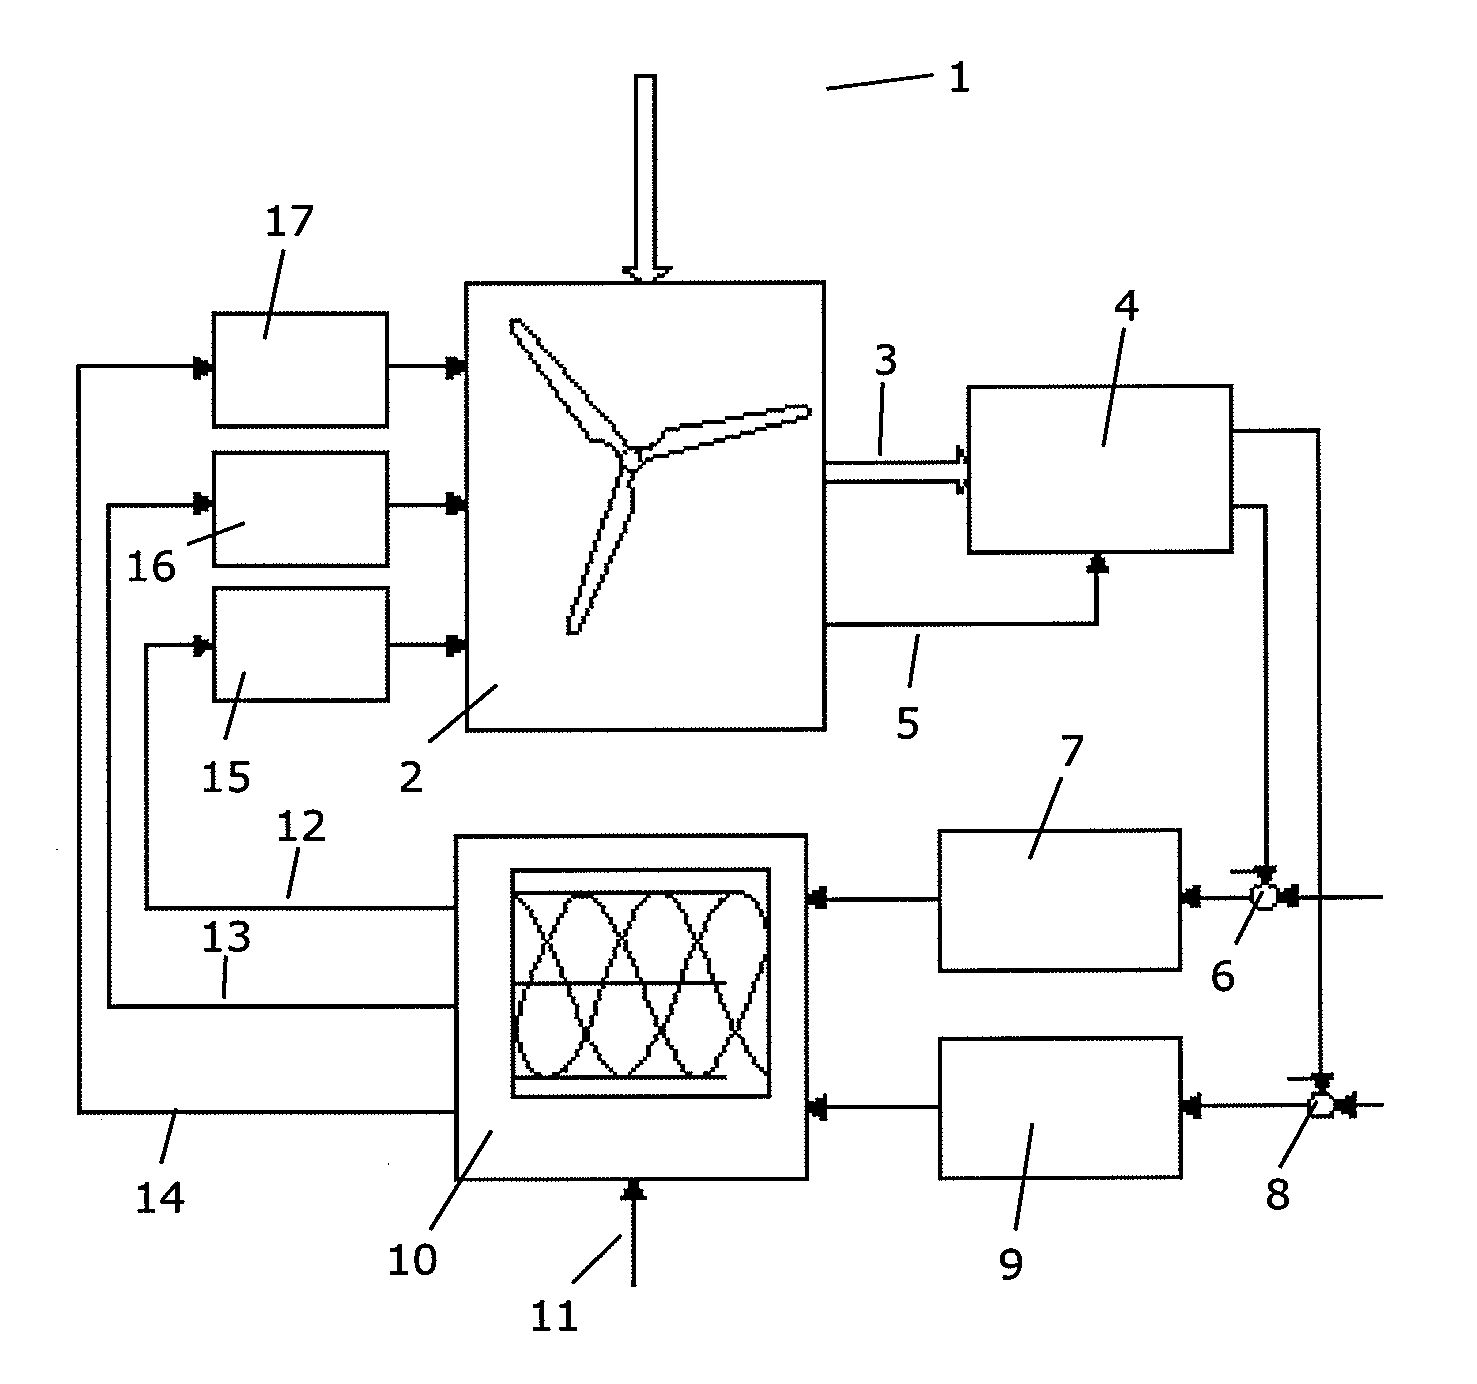 Method for evaluating performance of a system for controlling pitch of a set of blades of a wind turbine